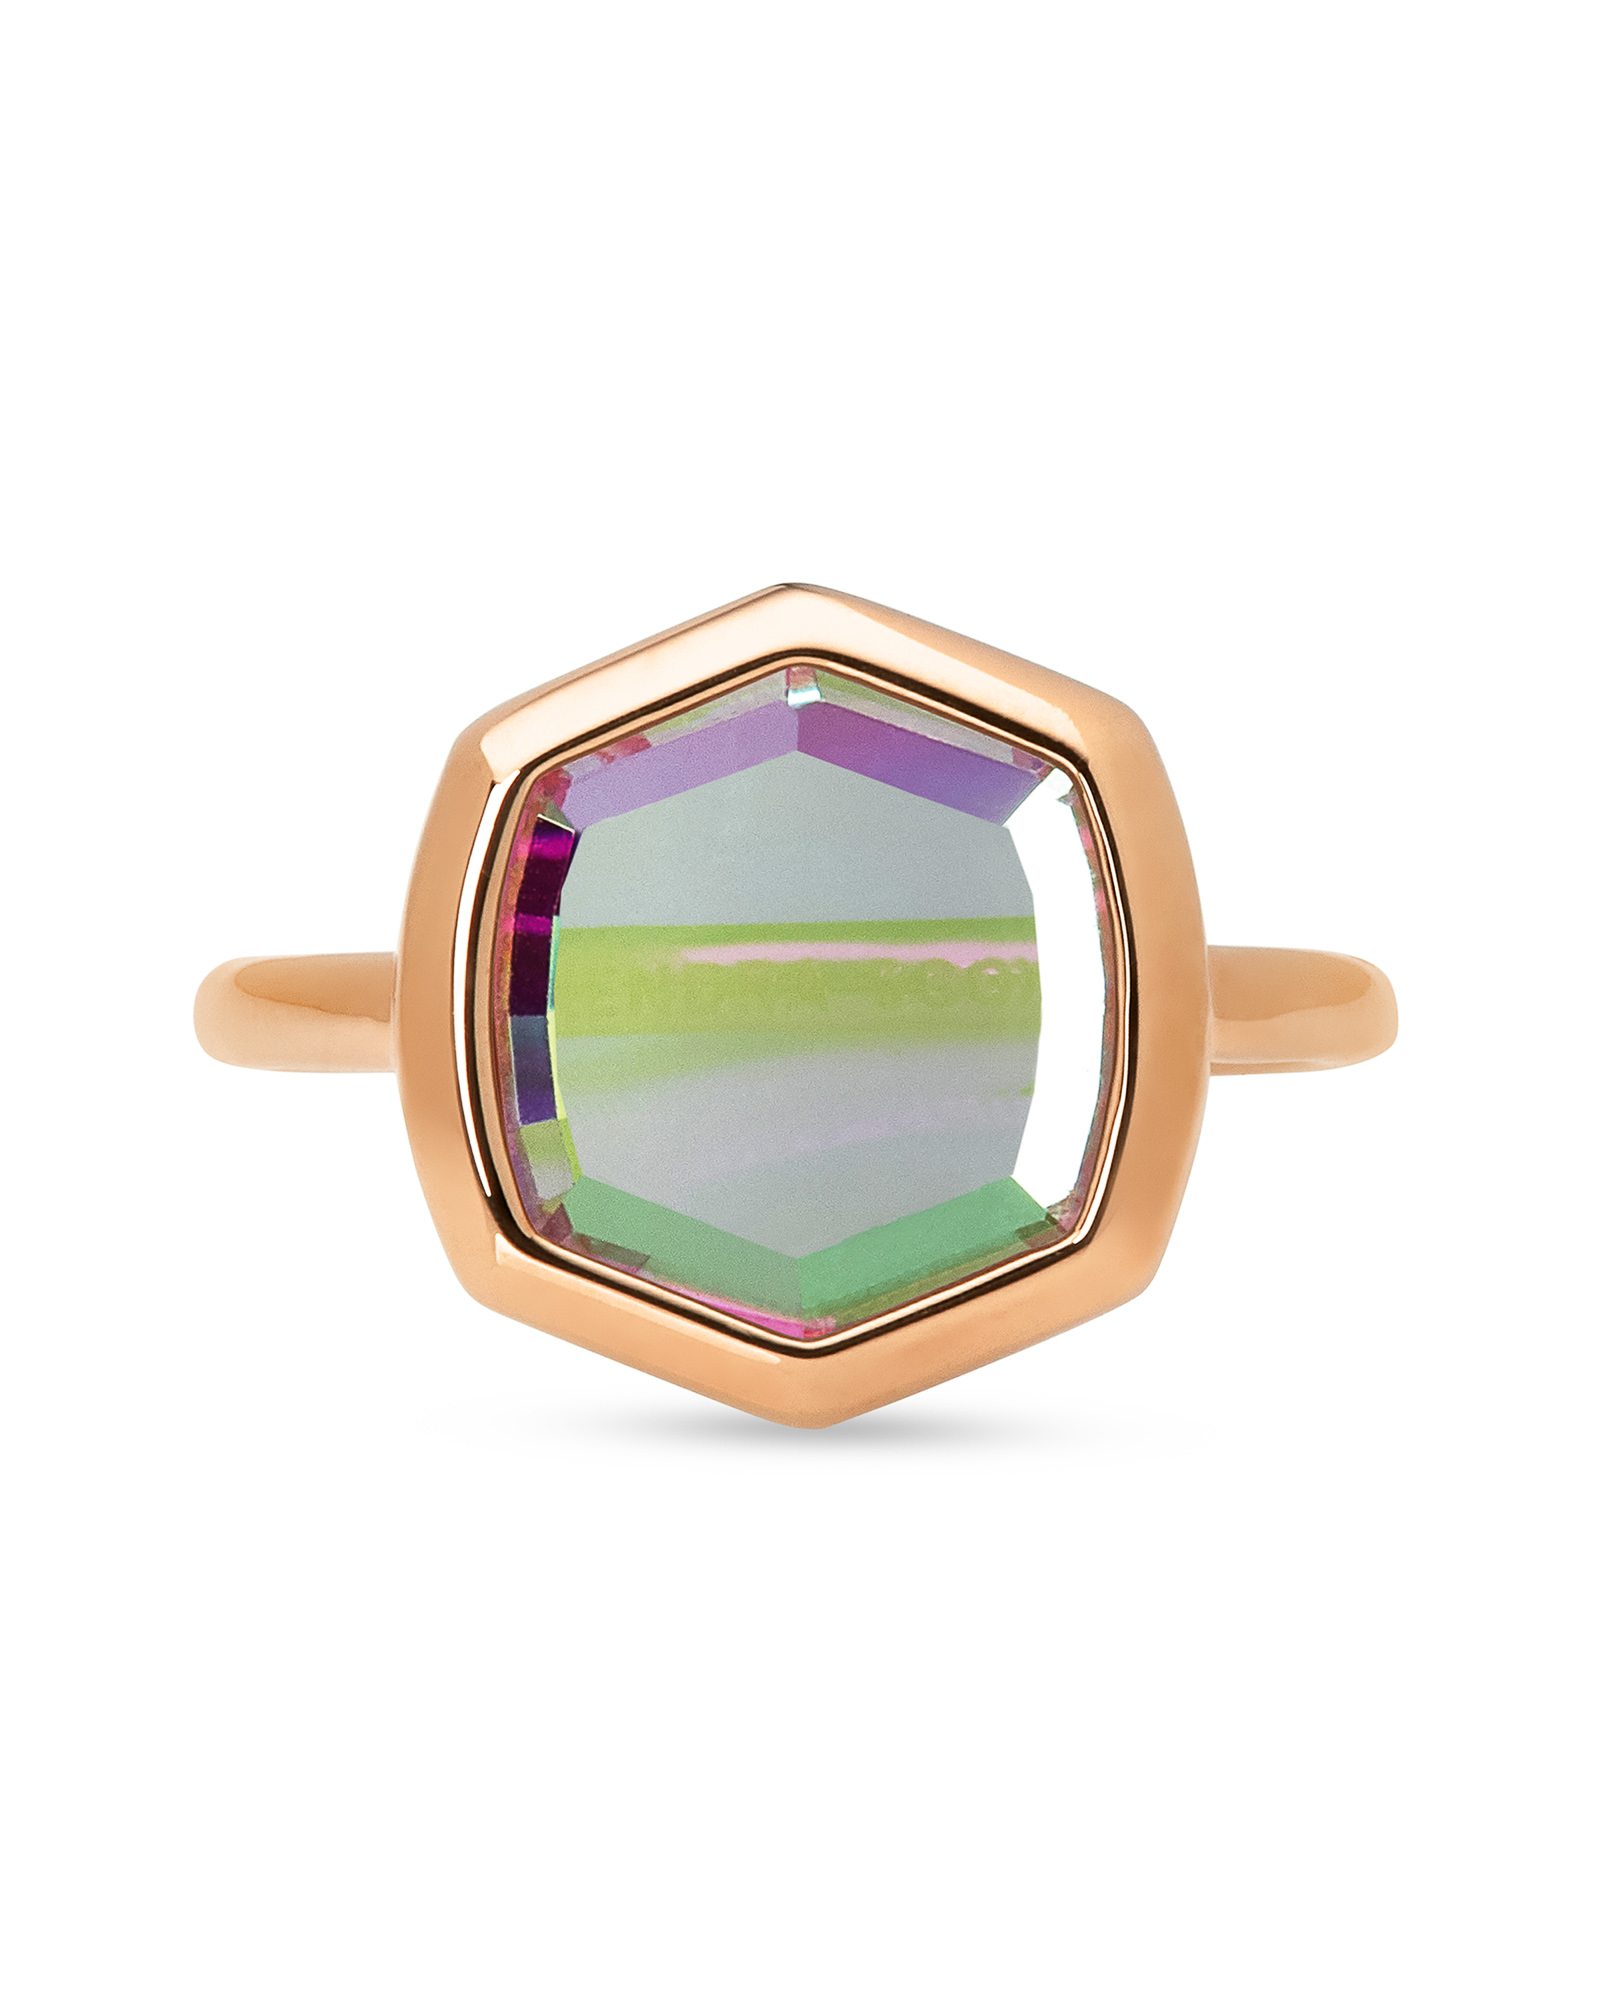 Davis 18k Rose Gold Vermeil Cocktail Ring in Ivory Mother-of-Pearl - 8 |  Kendra Scott